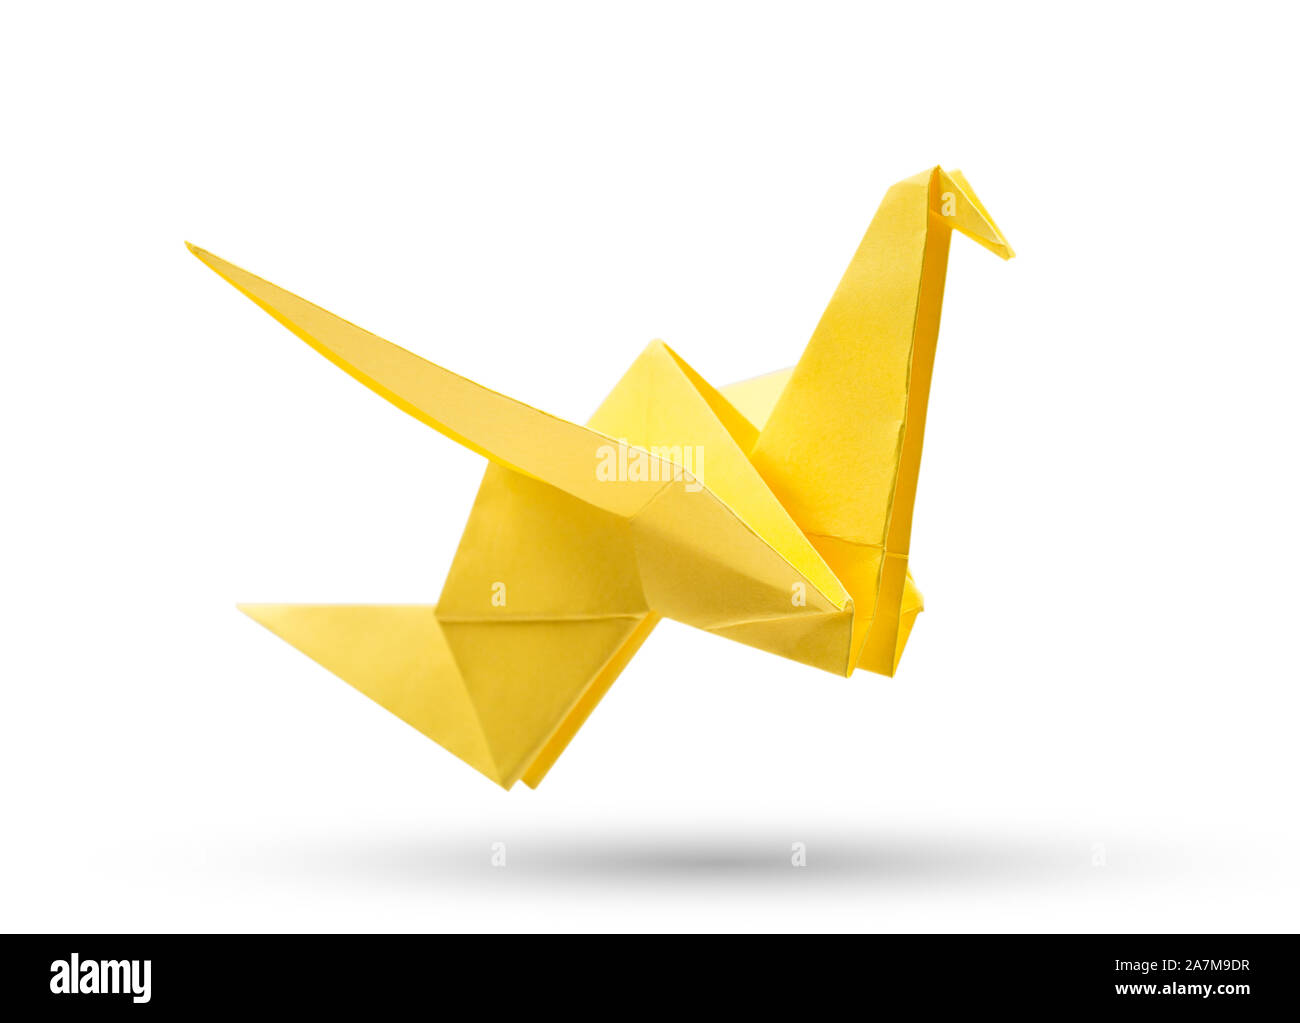 Origami flying bird isolated with clipping path. Japanese folded paper swan. Peace and hope symbol Stock Photo